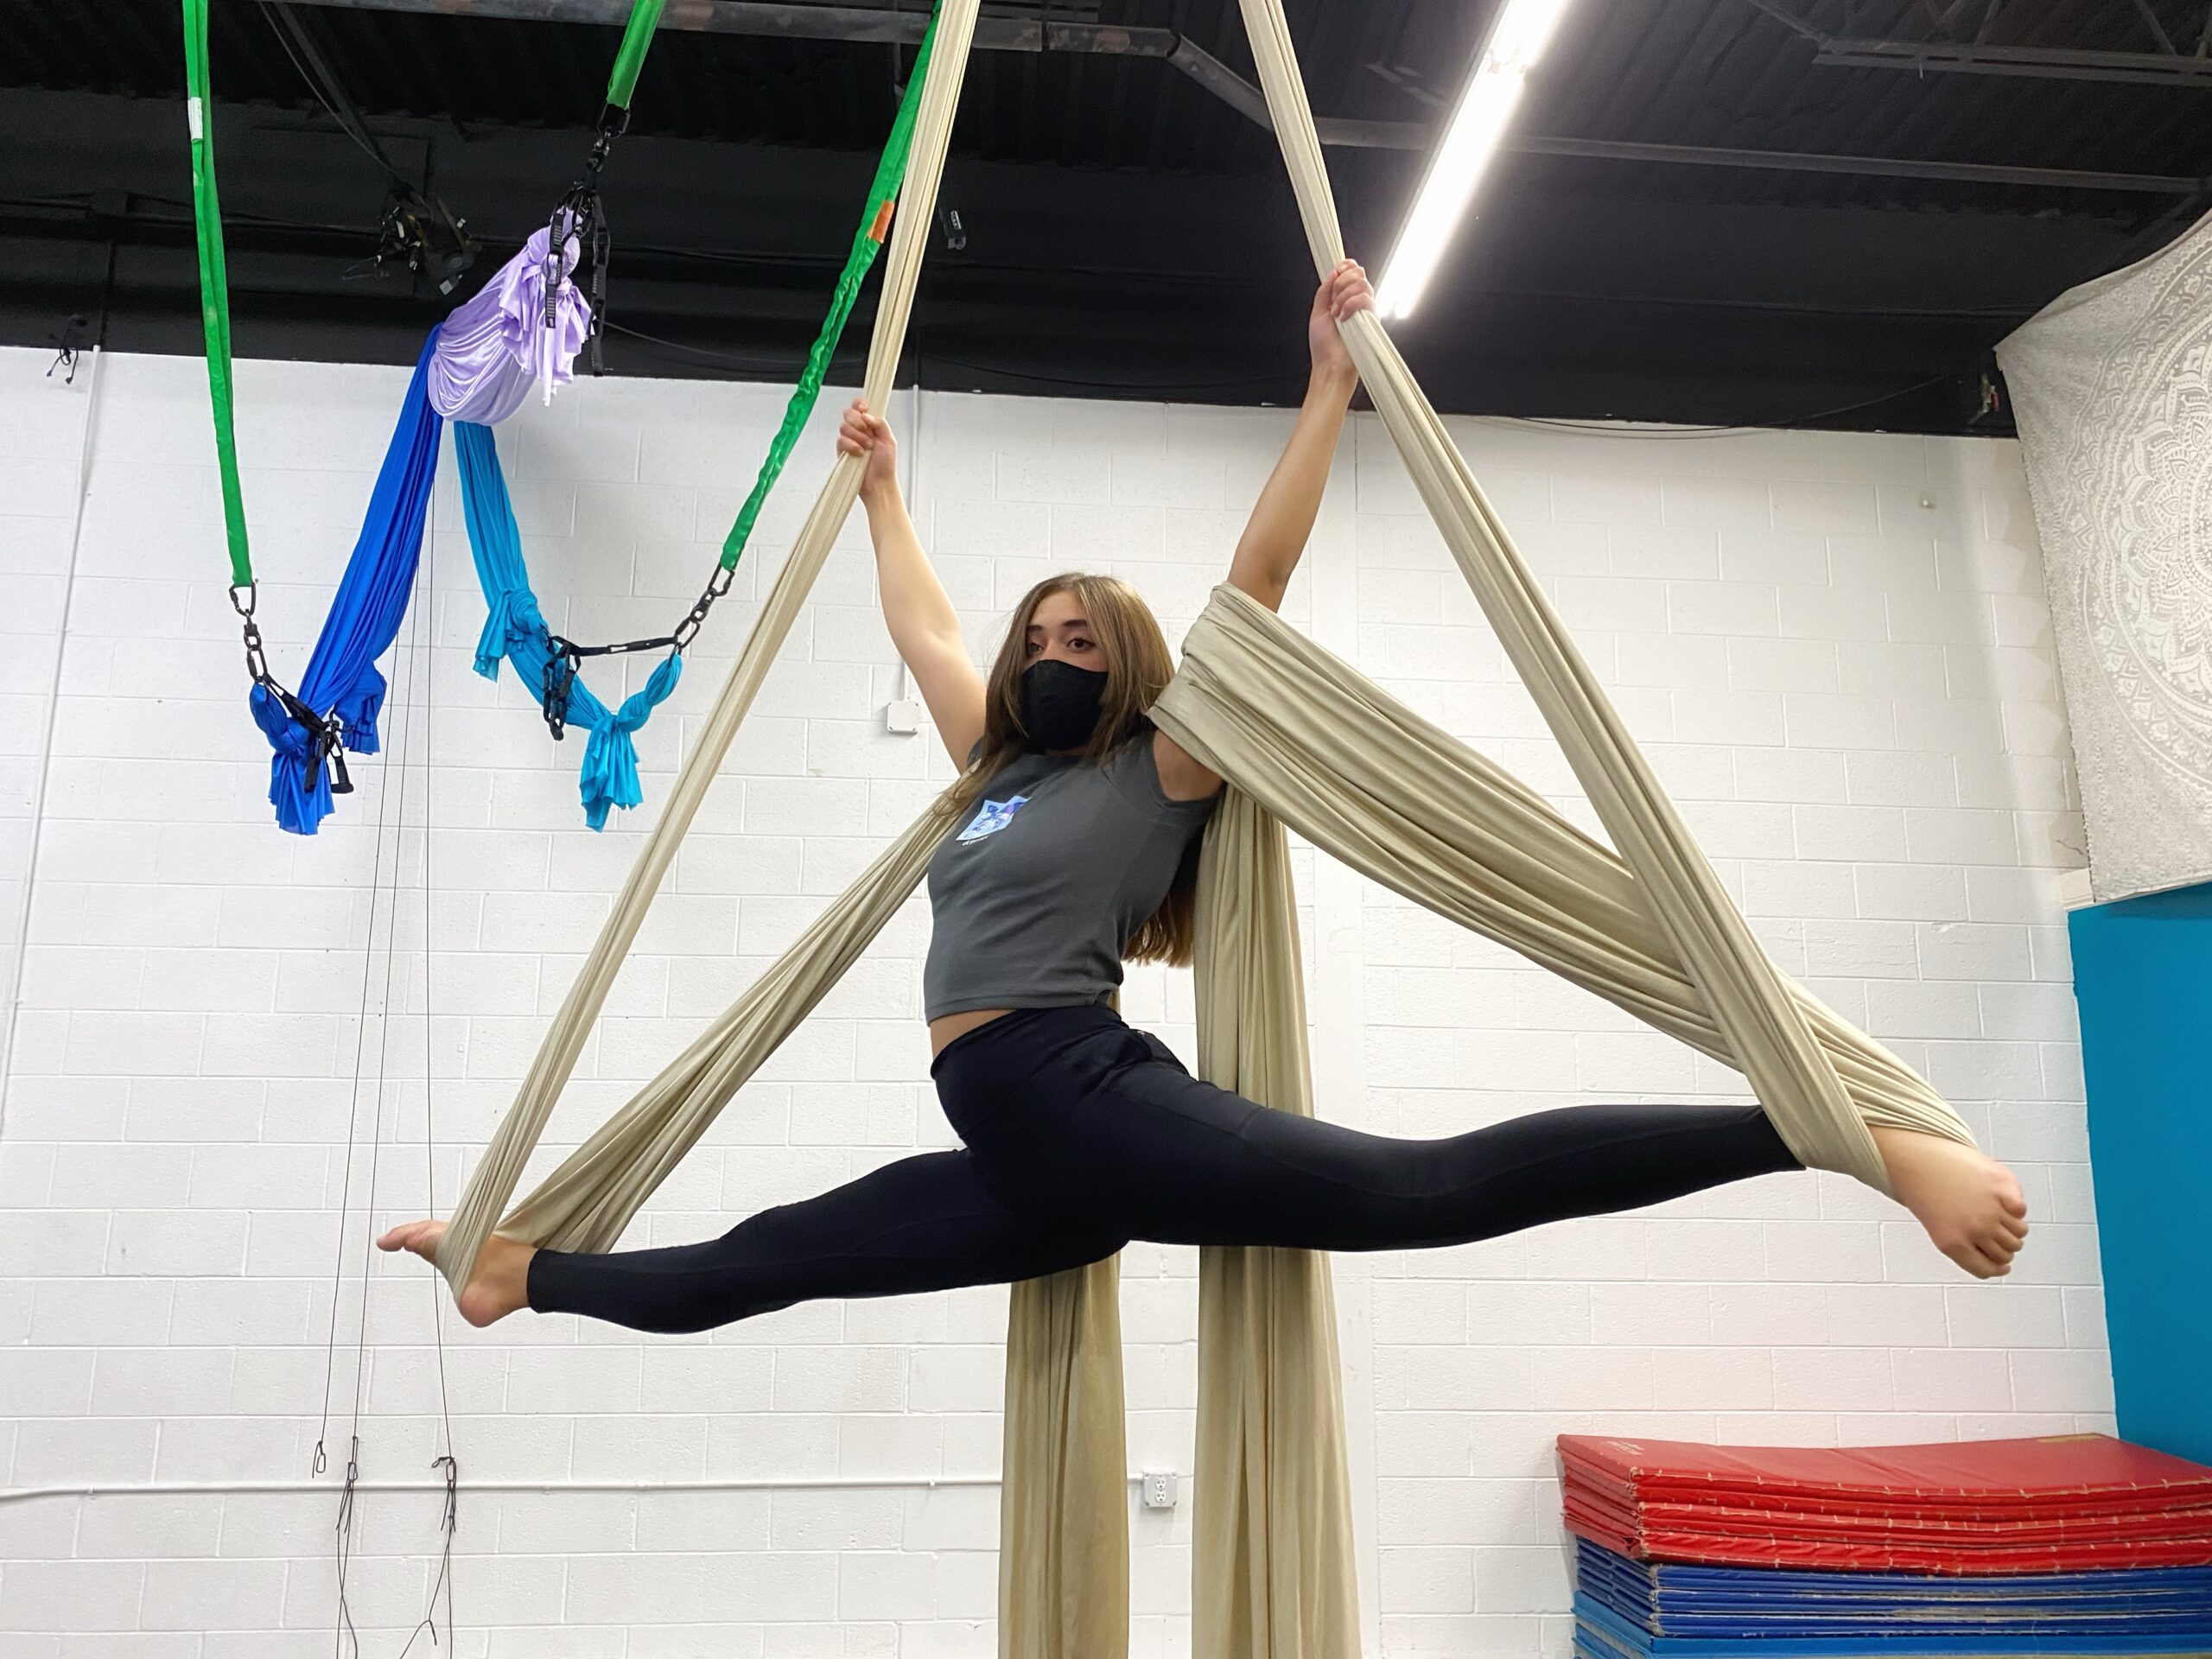 A silks student wearing a gray crop top and black leggings performs a split on champagne colored aerial silks